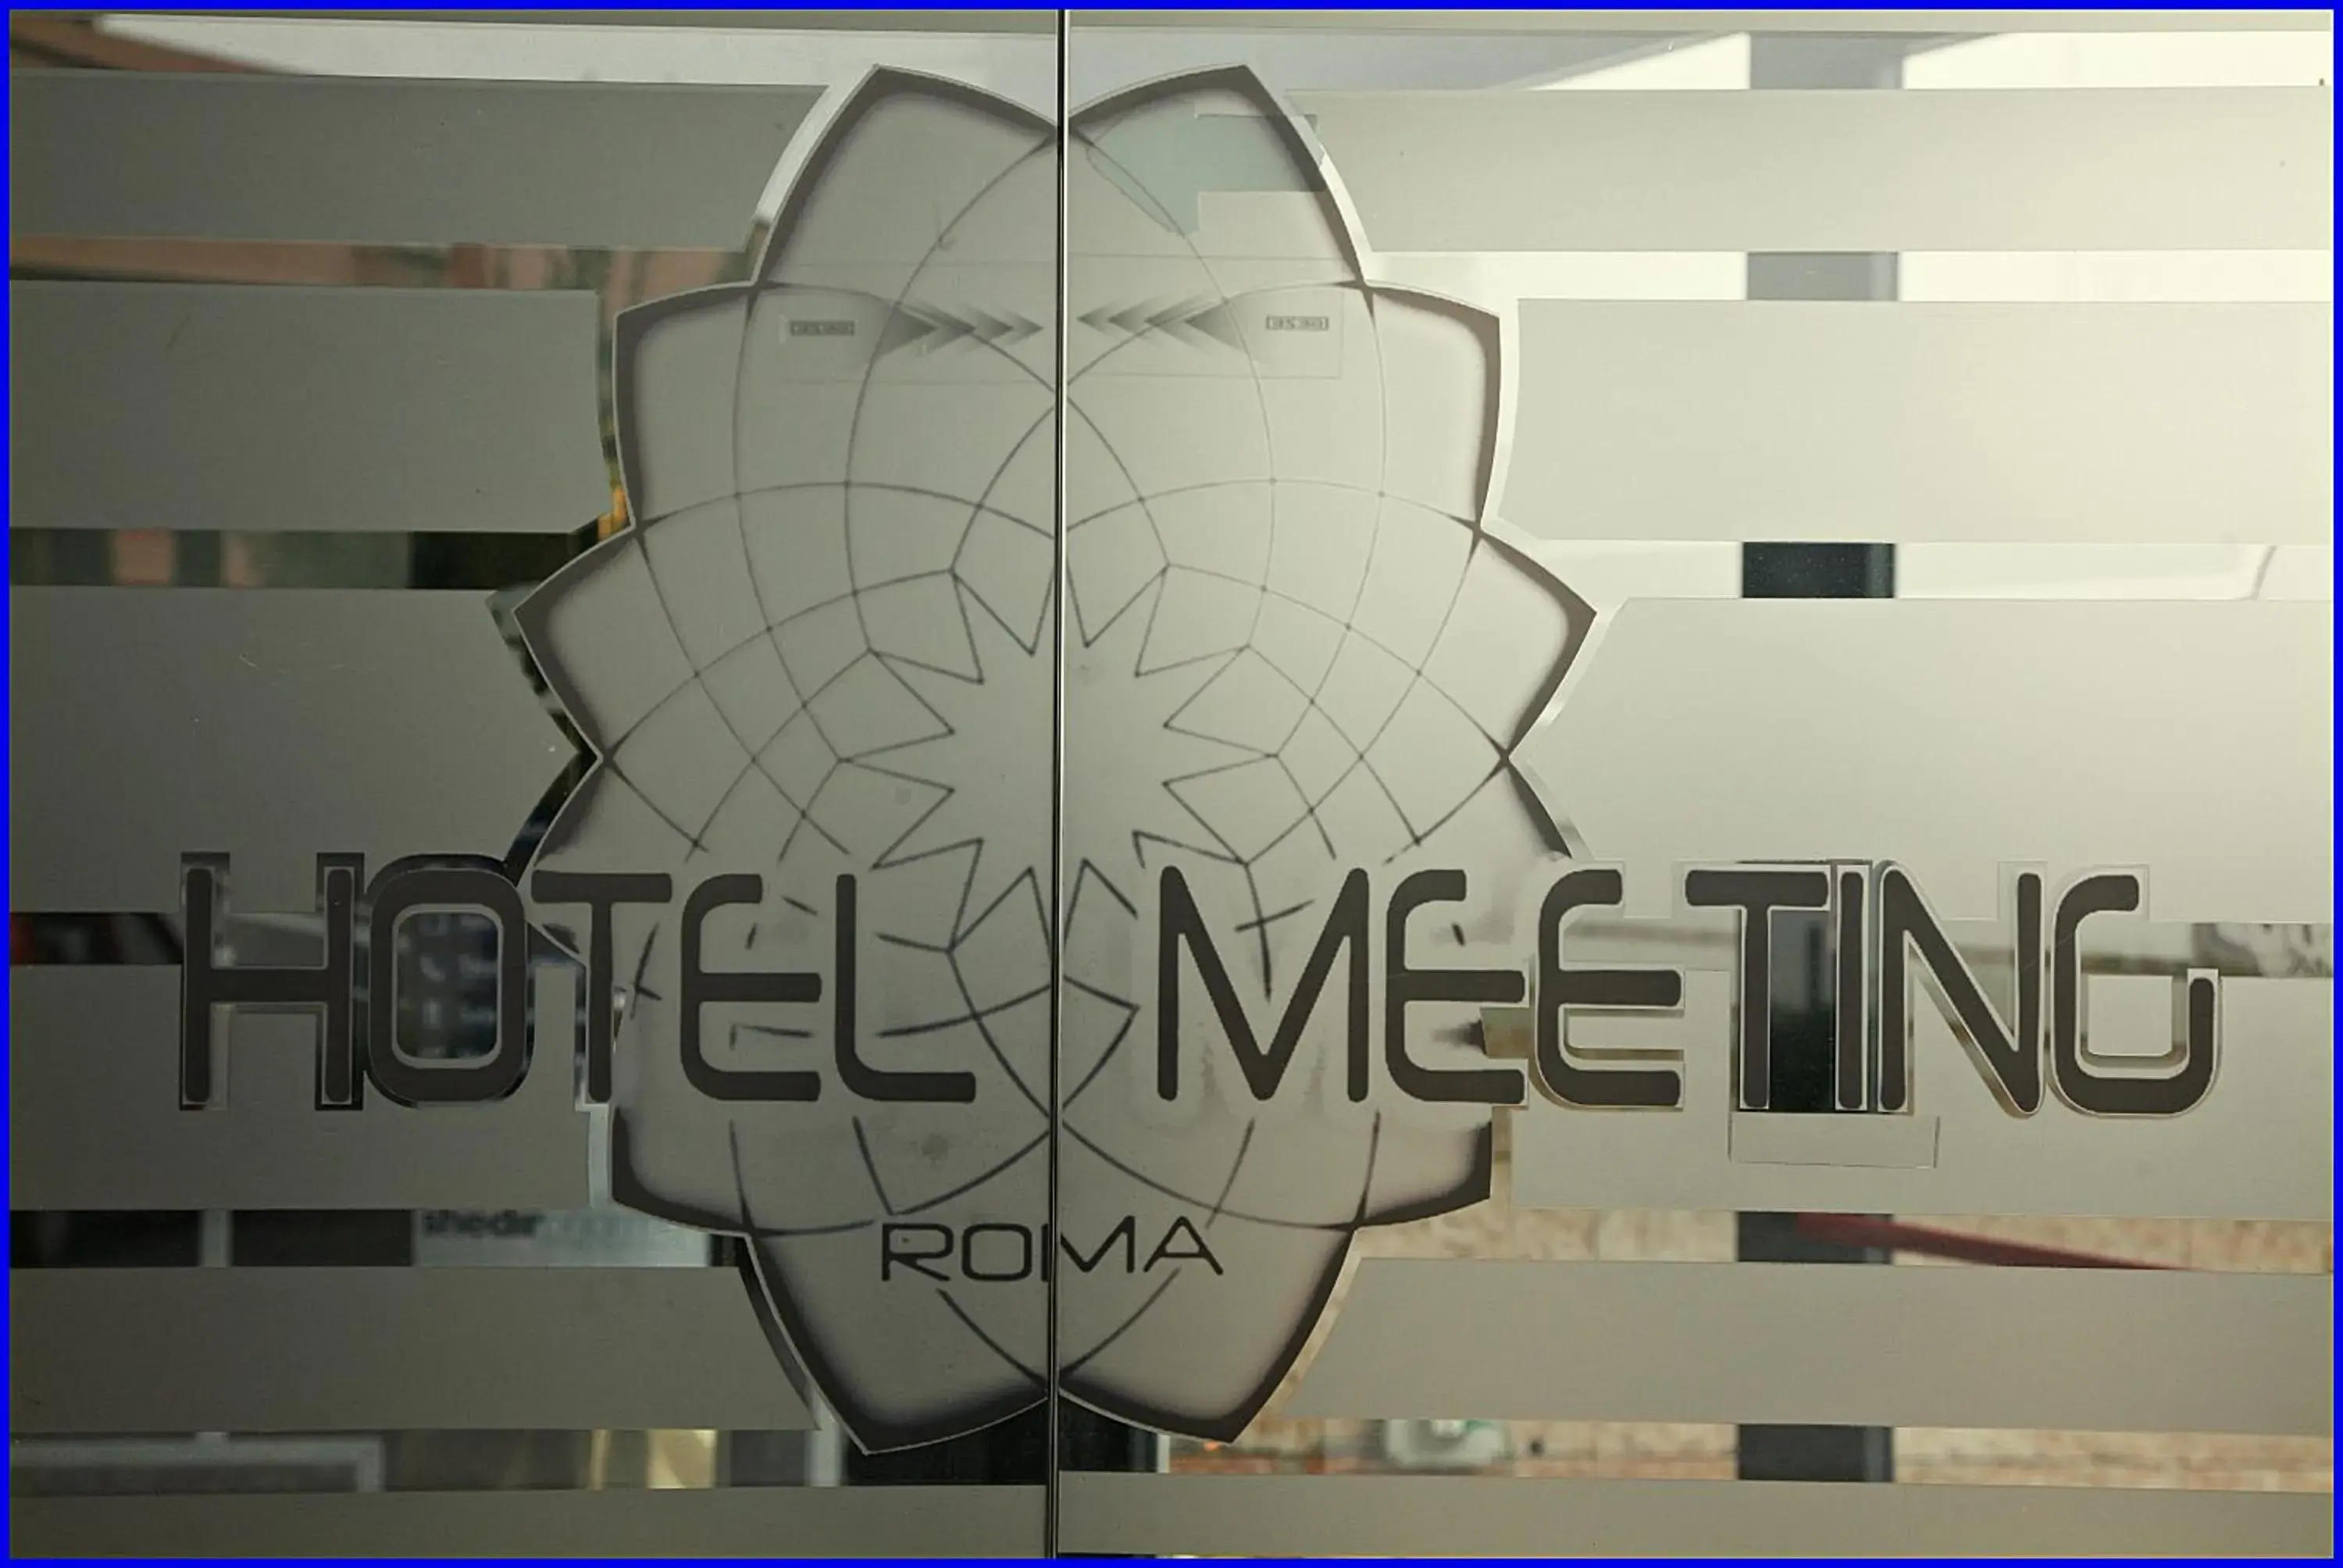 Logo/Certificate/Sign in Hotel Meeting